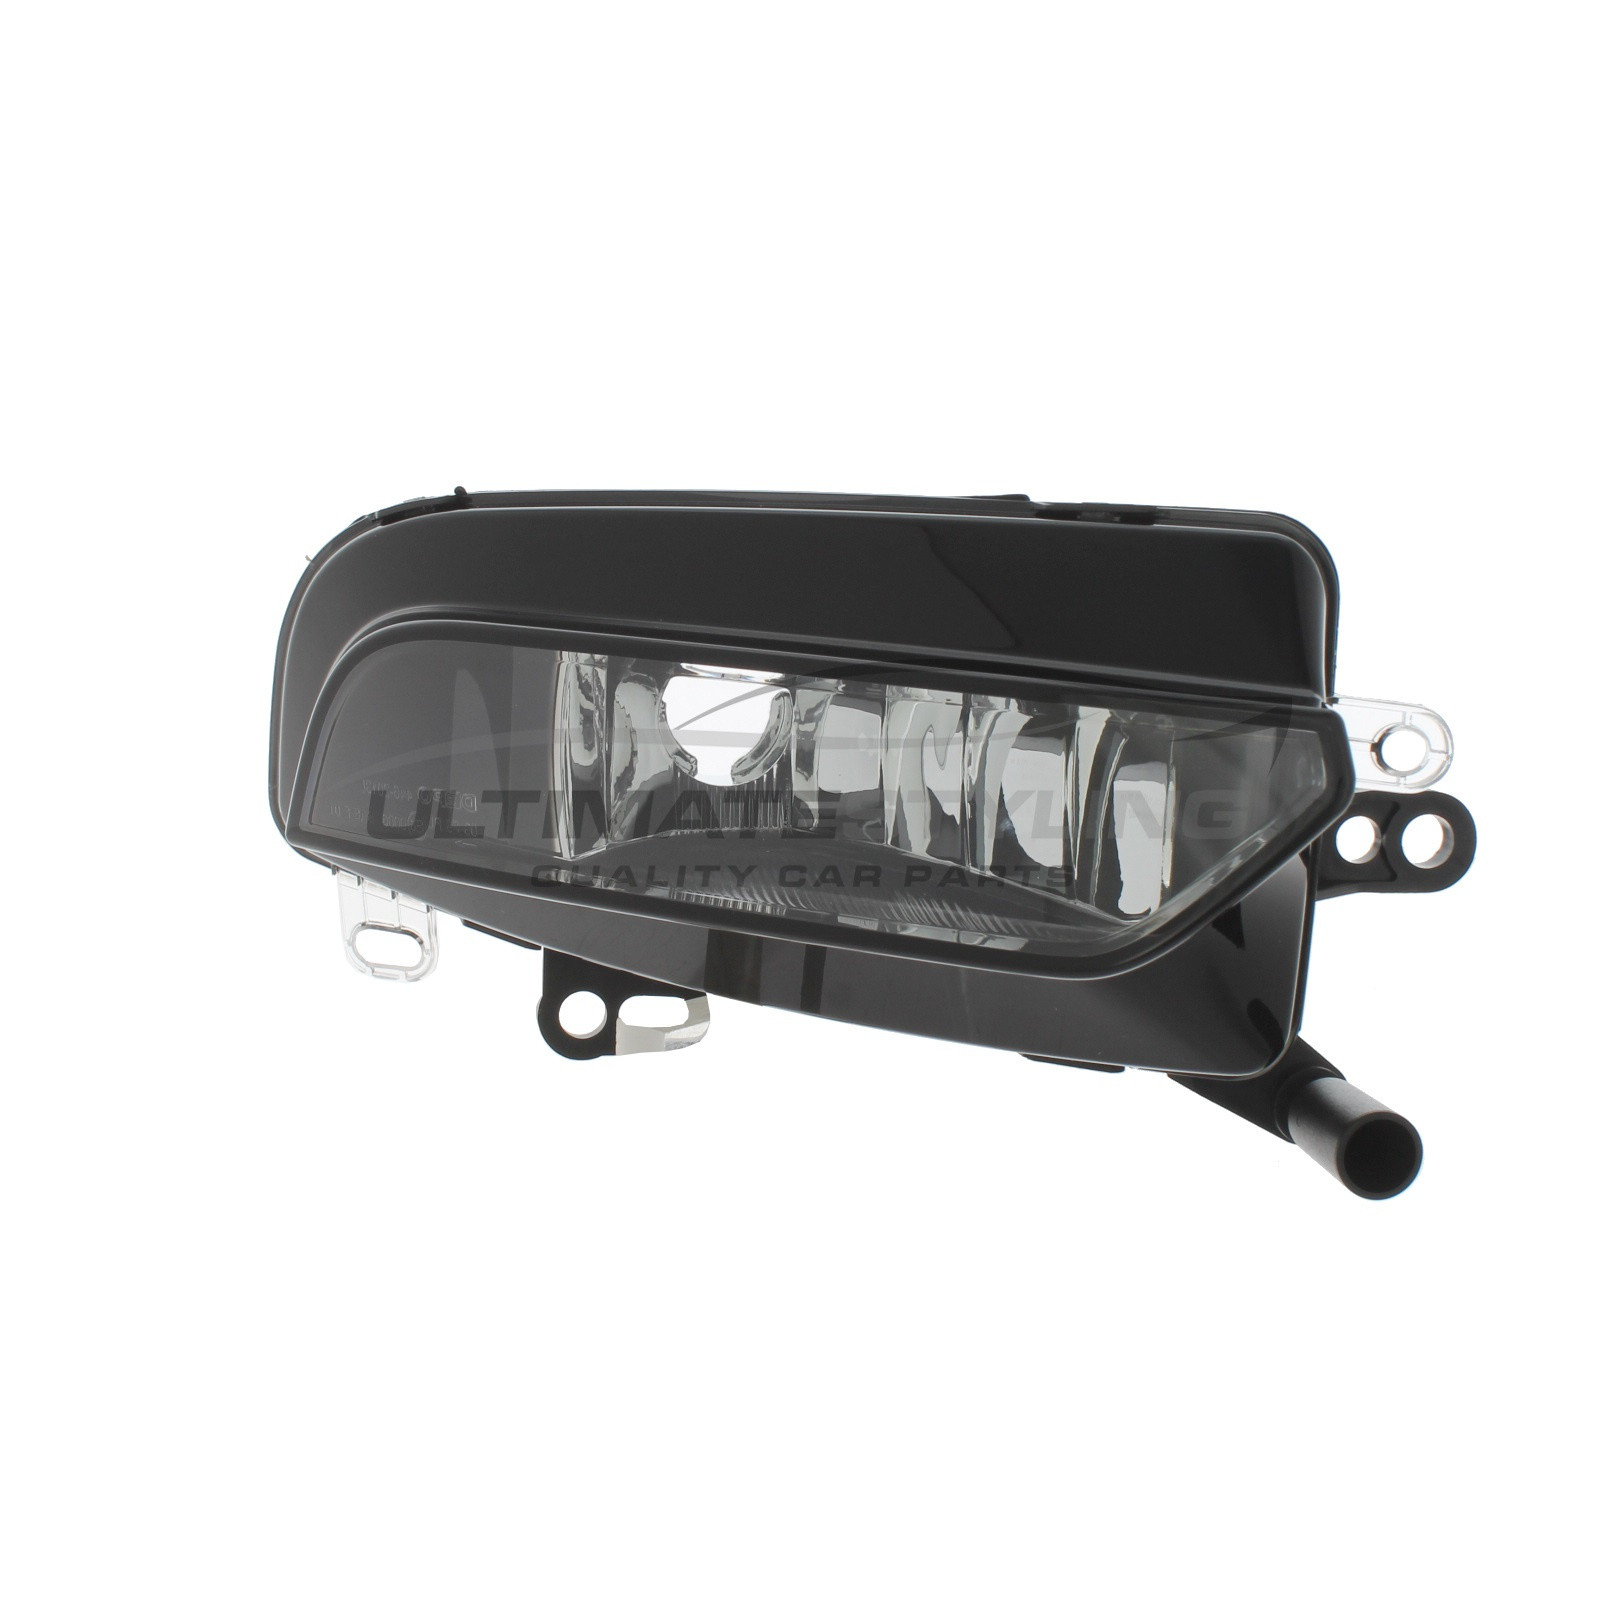 Audi A3 2012-2016 Front Fog Light Non-LED Corner of Lamp Points Upwards - Pointed Corner Type Drivers Side (RH)